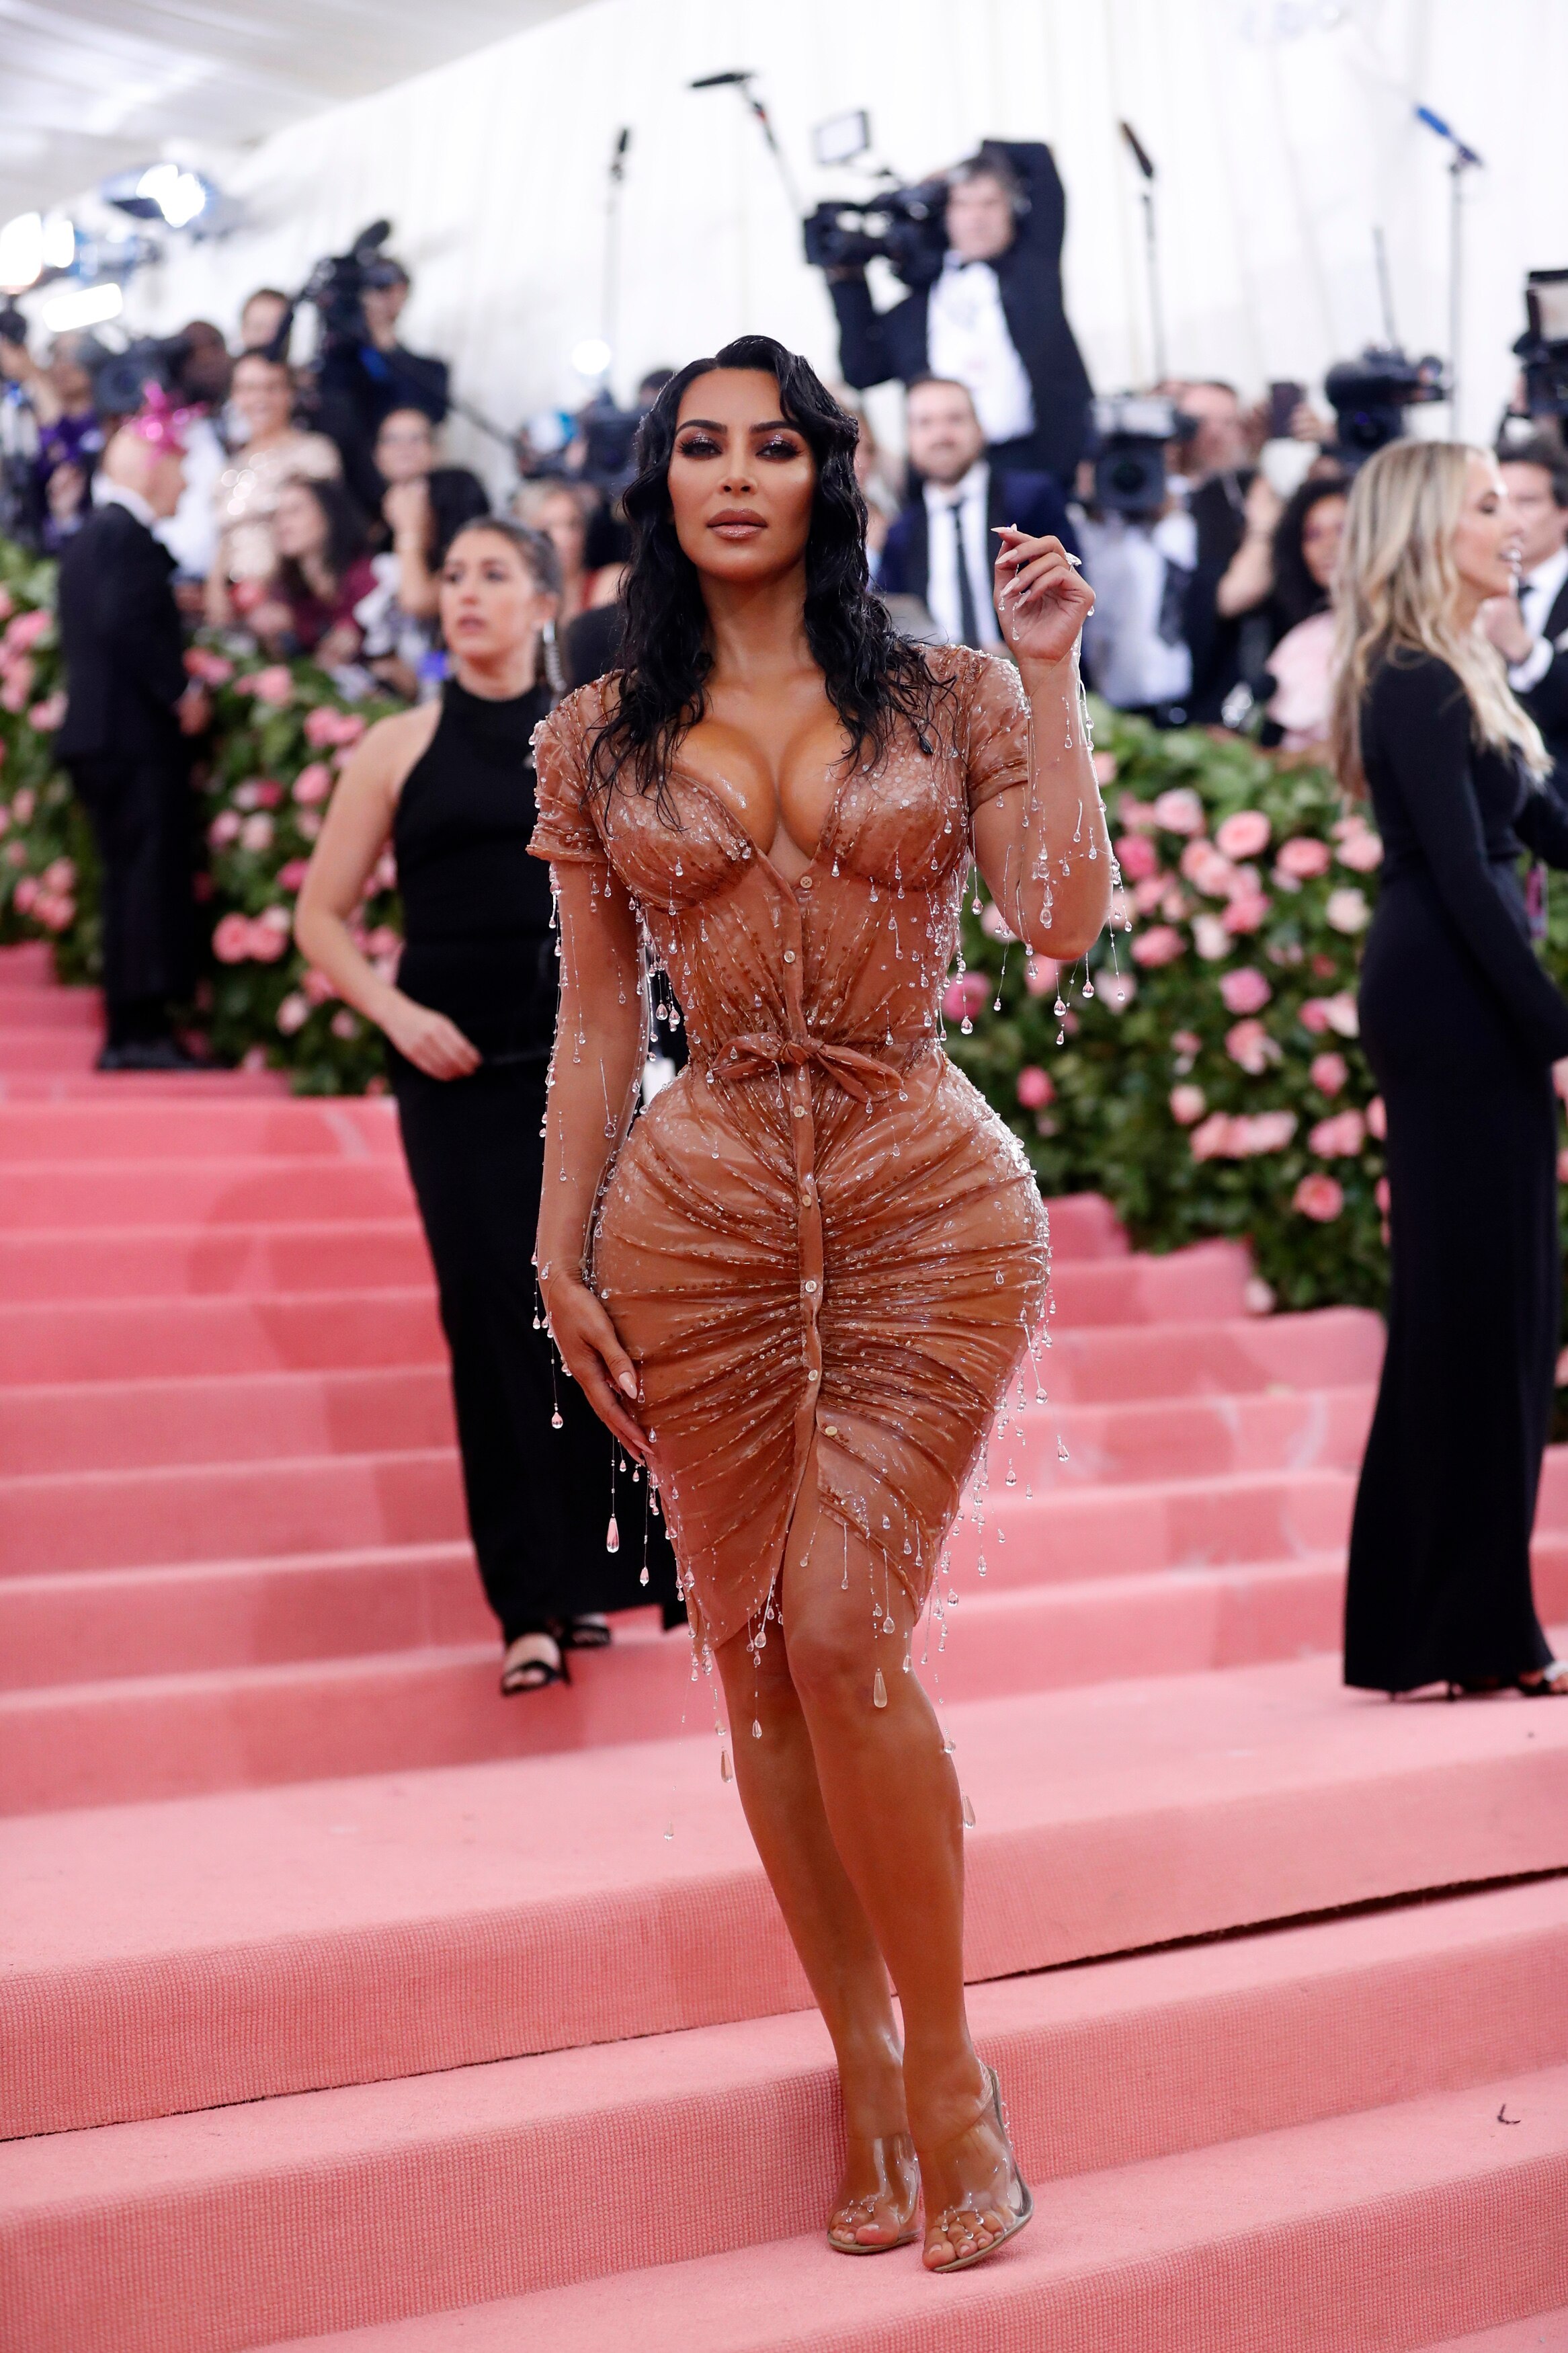 Kim Kardashian wearing a blush latex dress with glass beads hanging of it looking like raindrops. He hair is styled to look wet